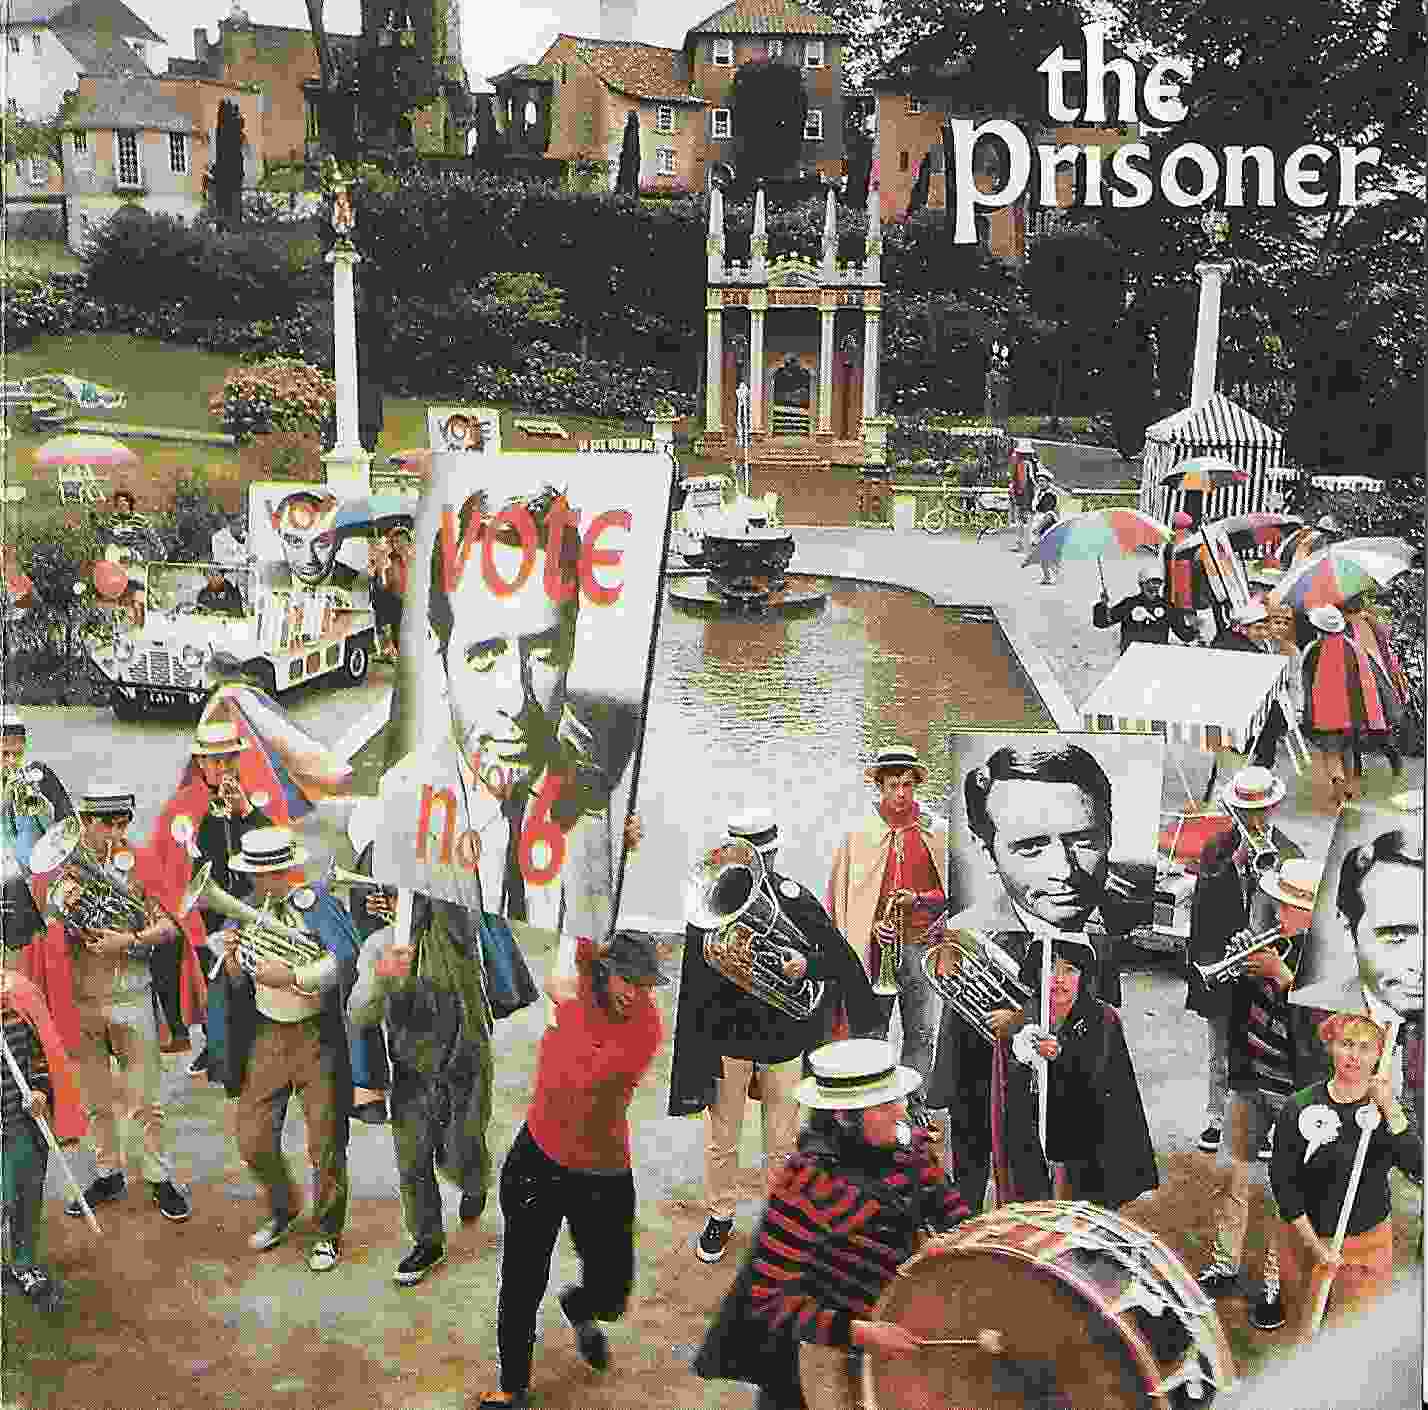 Picture of WEBA 066 CD The prisoner by artist Various from ITV, Channel 4 and Channel 5 library